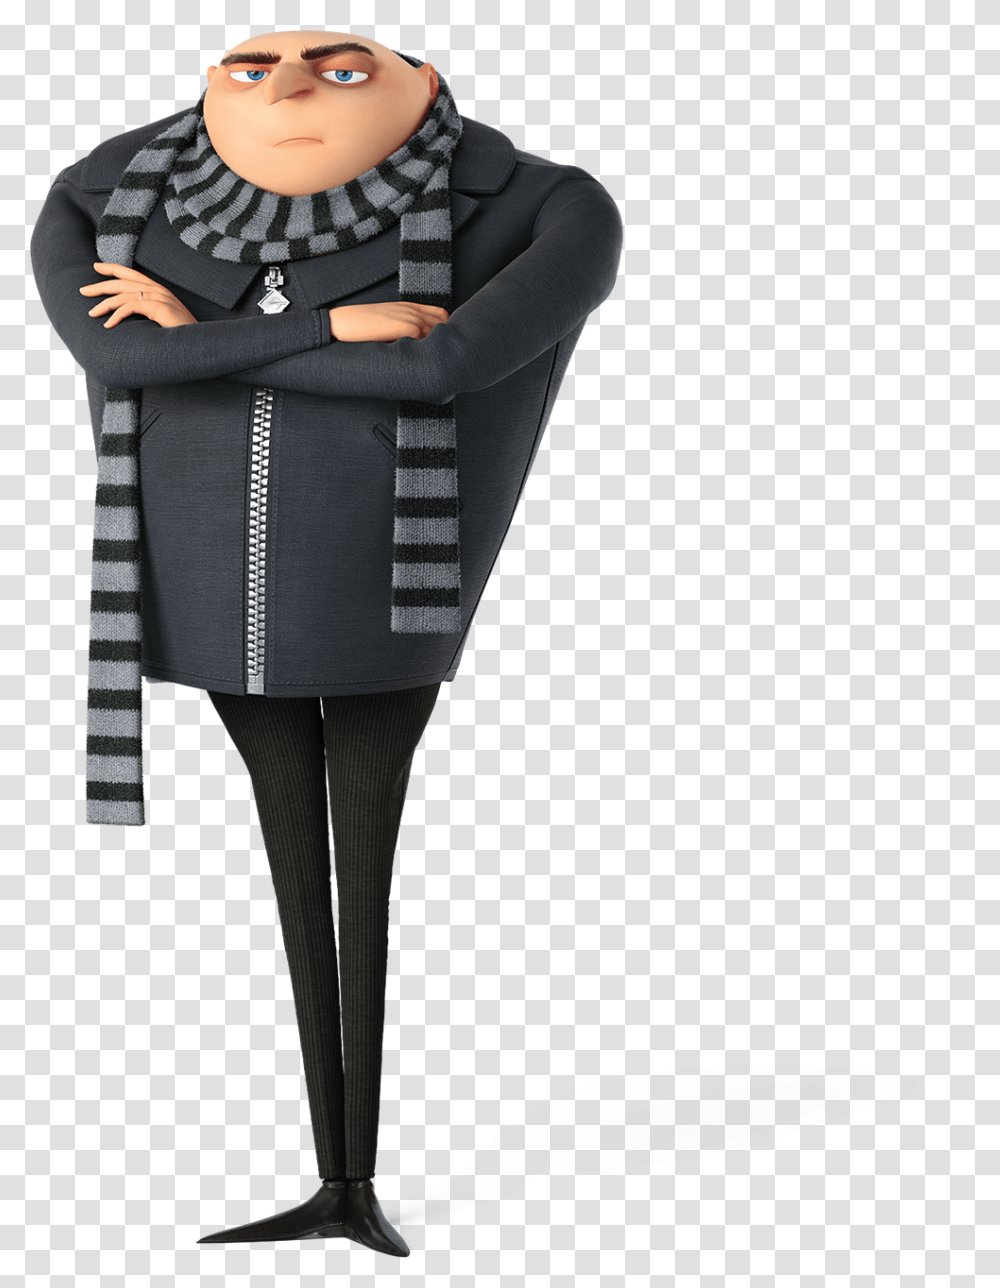 Gru Despicable Me Characters, Person, Sleeve, Face Transparent Png